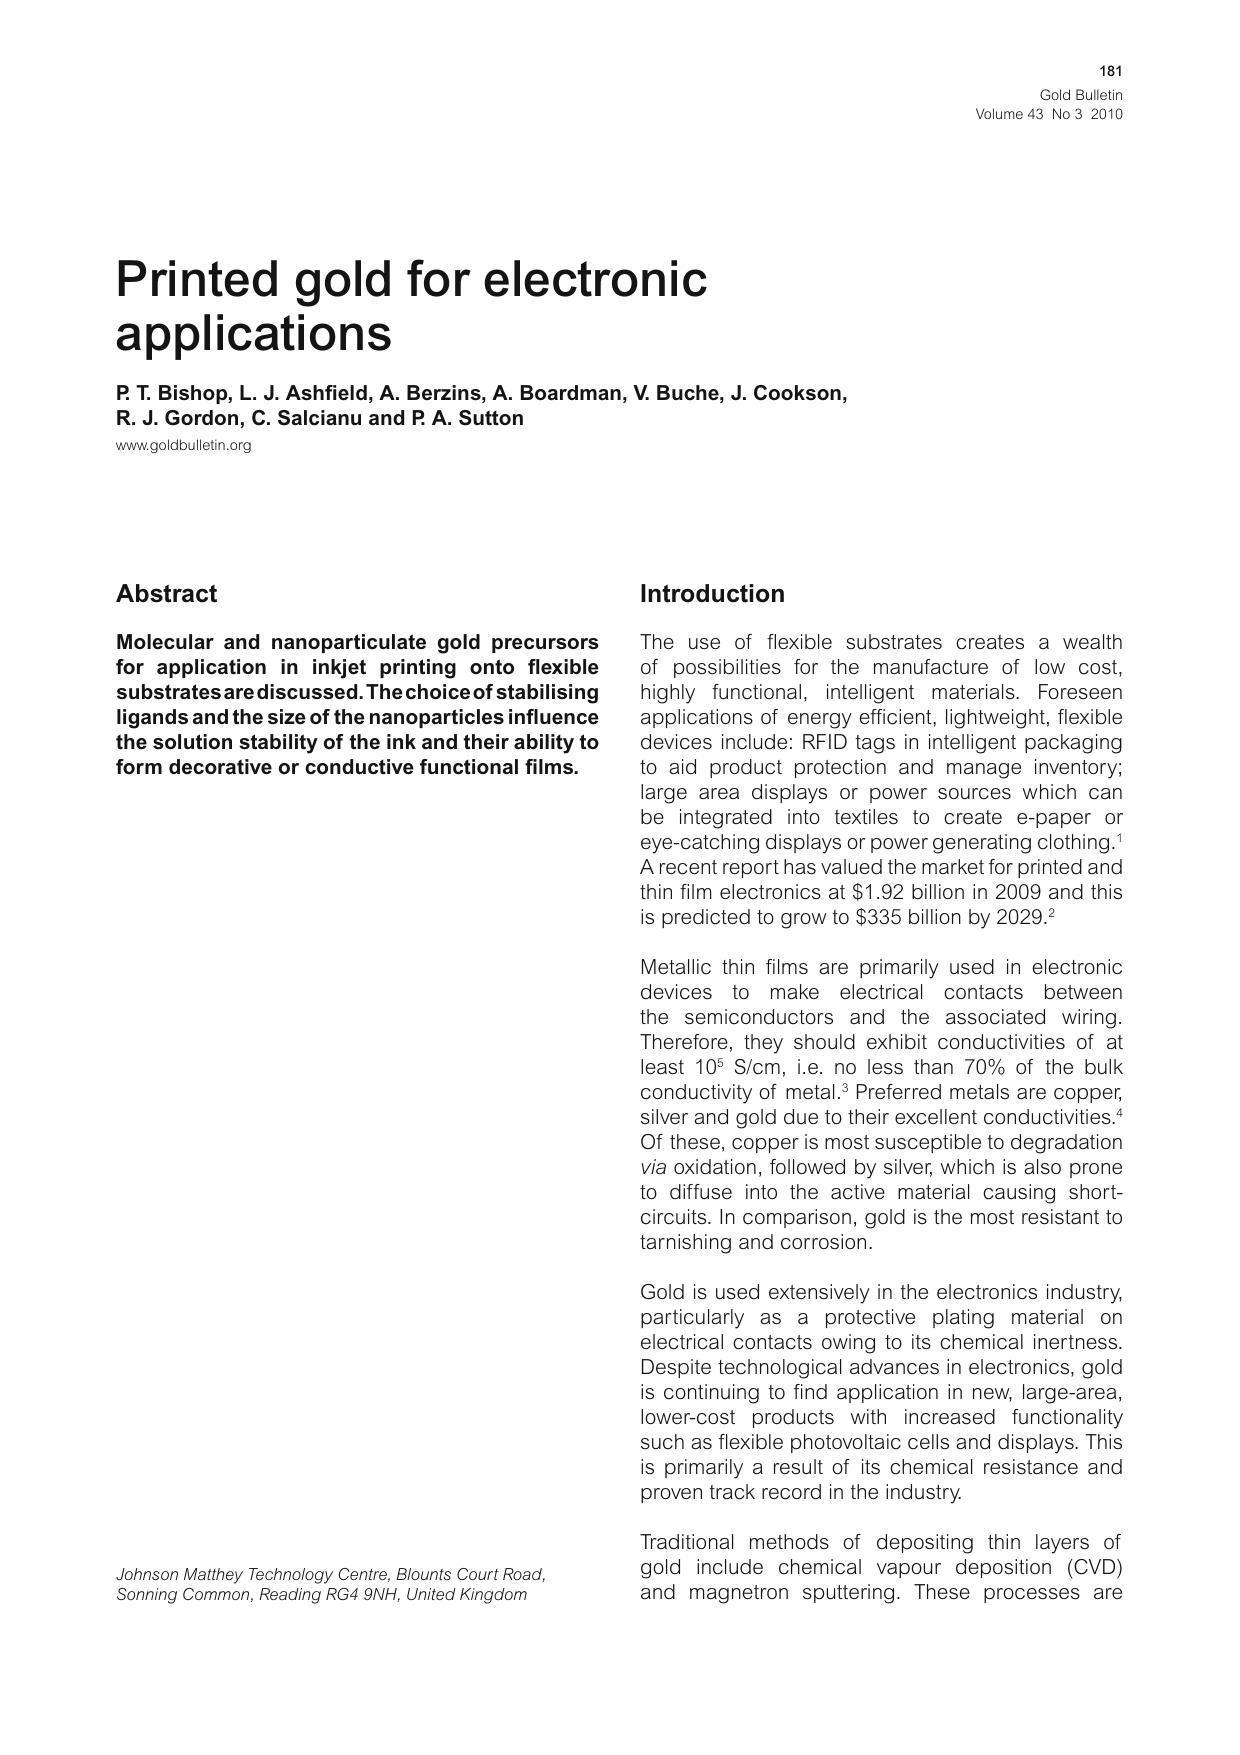 Printed gold for electronic applications by Unknown